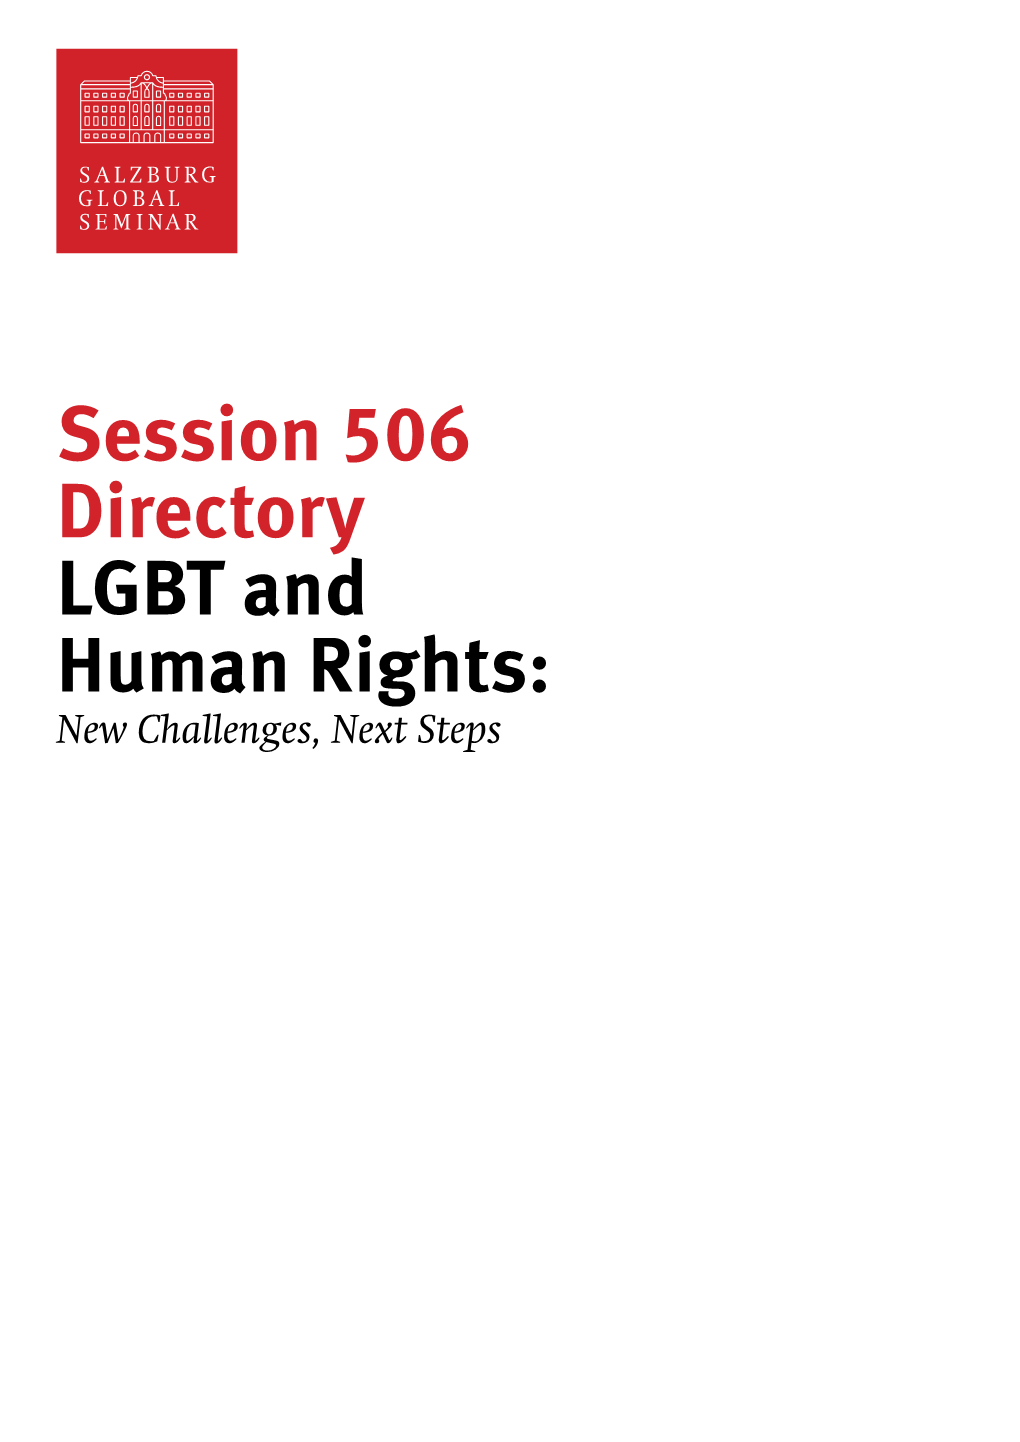 Session 506 Directory LGBT and Human Rights: New Challenges, Next Steps LGBT and Human Rights | SESSION 505 DIRECTORY 3